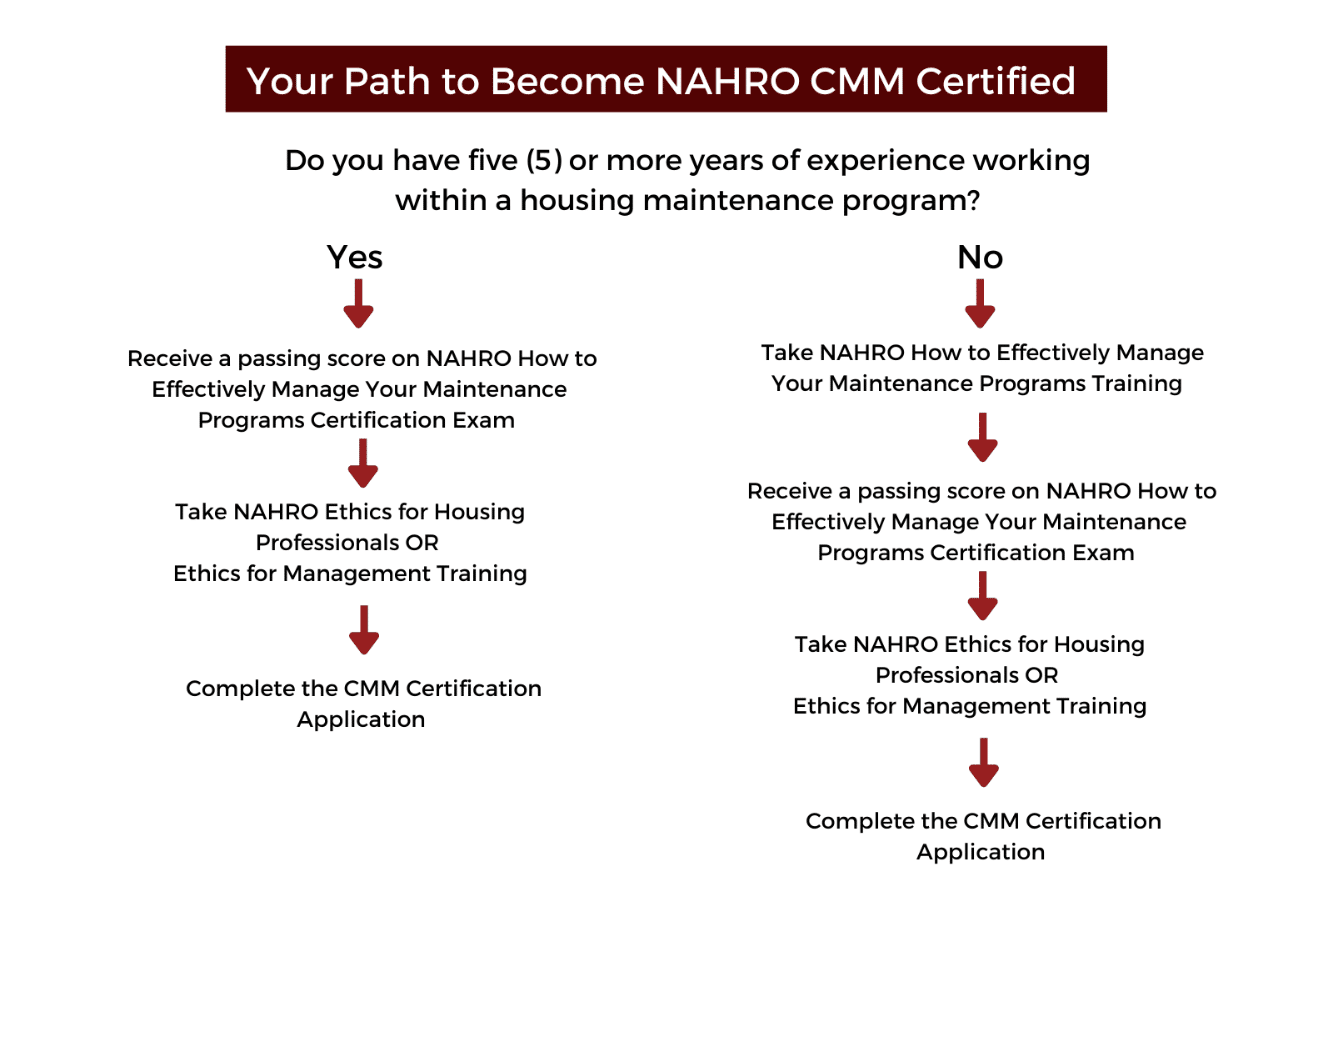 Your Path to Become NAHRO Certified Maintenance Manager (CMM) Flow Chart  There are two paths to become NAHRO CMM Certified.  Path 1: If you do not have five or more years of experience working within a housing maintenance program, you are required to take the NAHRO How to Effectively Manage Your Maintenance Programs Training. This path also requires you to receive a passing score on the NAHRO How to Effectively Manage Your Maintenance Certification Exam, take NAHRO Ethics for Housing Professionals or Ethics for Management Training and Complete the CMM Certification Application.  Path 2: If you have five or more years of experience working within a housing maintenance program, you may forgo the NAHRO How to Effectively Manage your Maintenance Training. This path still requires you to receive a passing score on the NAHRO How to Effectively Manage Your Maintenance Certification Exam, take NAHRO Ethics for Housing Professionals or Ethics for Management Training and Complete the CMM Certification Application.